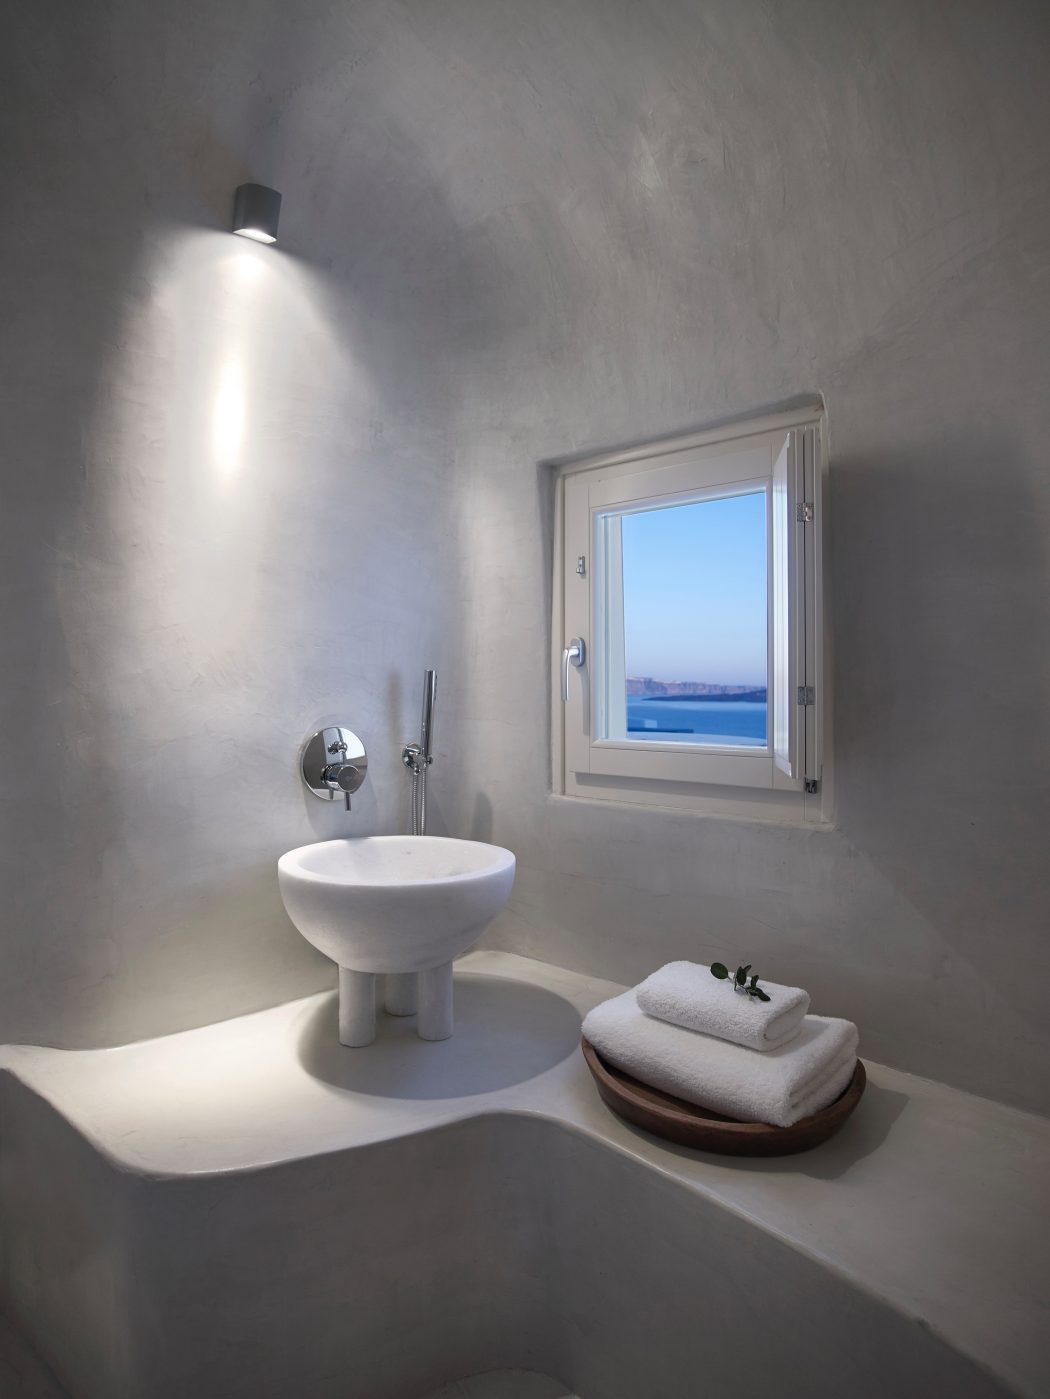 The master bathroom features a whumsy free standing sink on small legs and a small window with a view